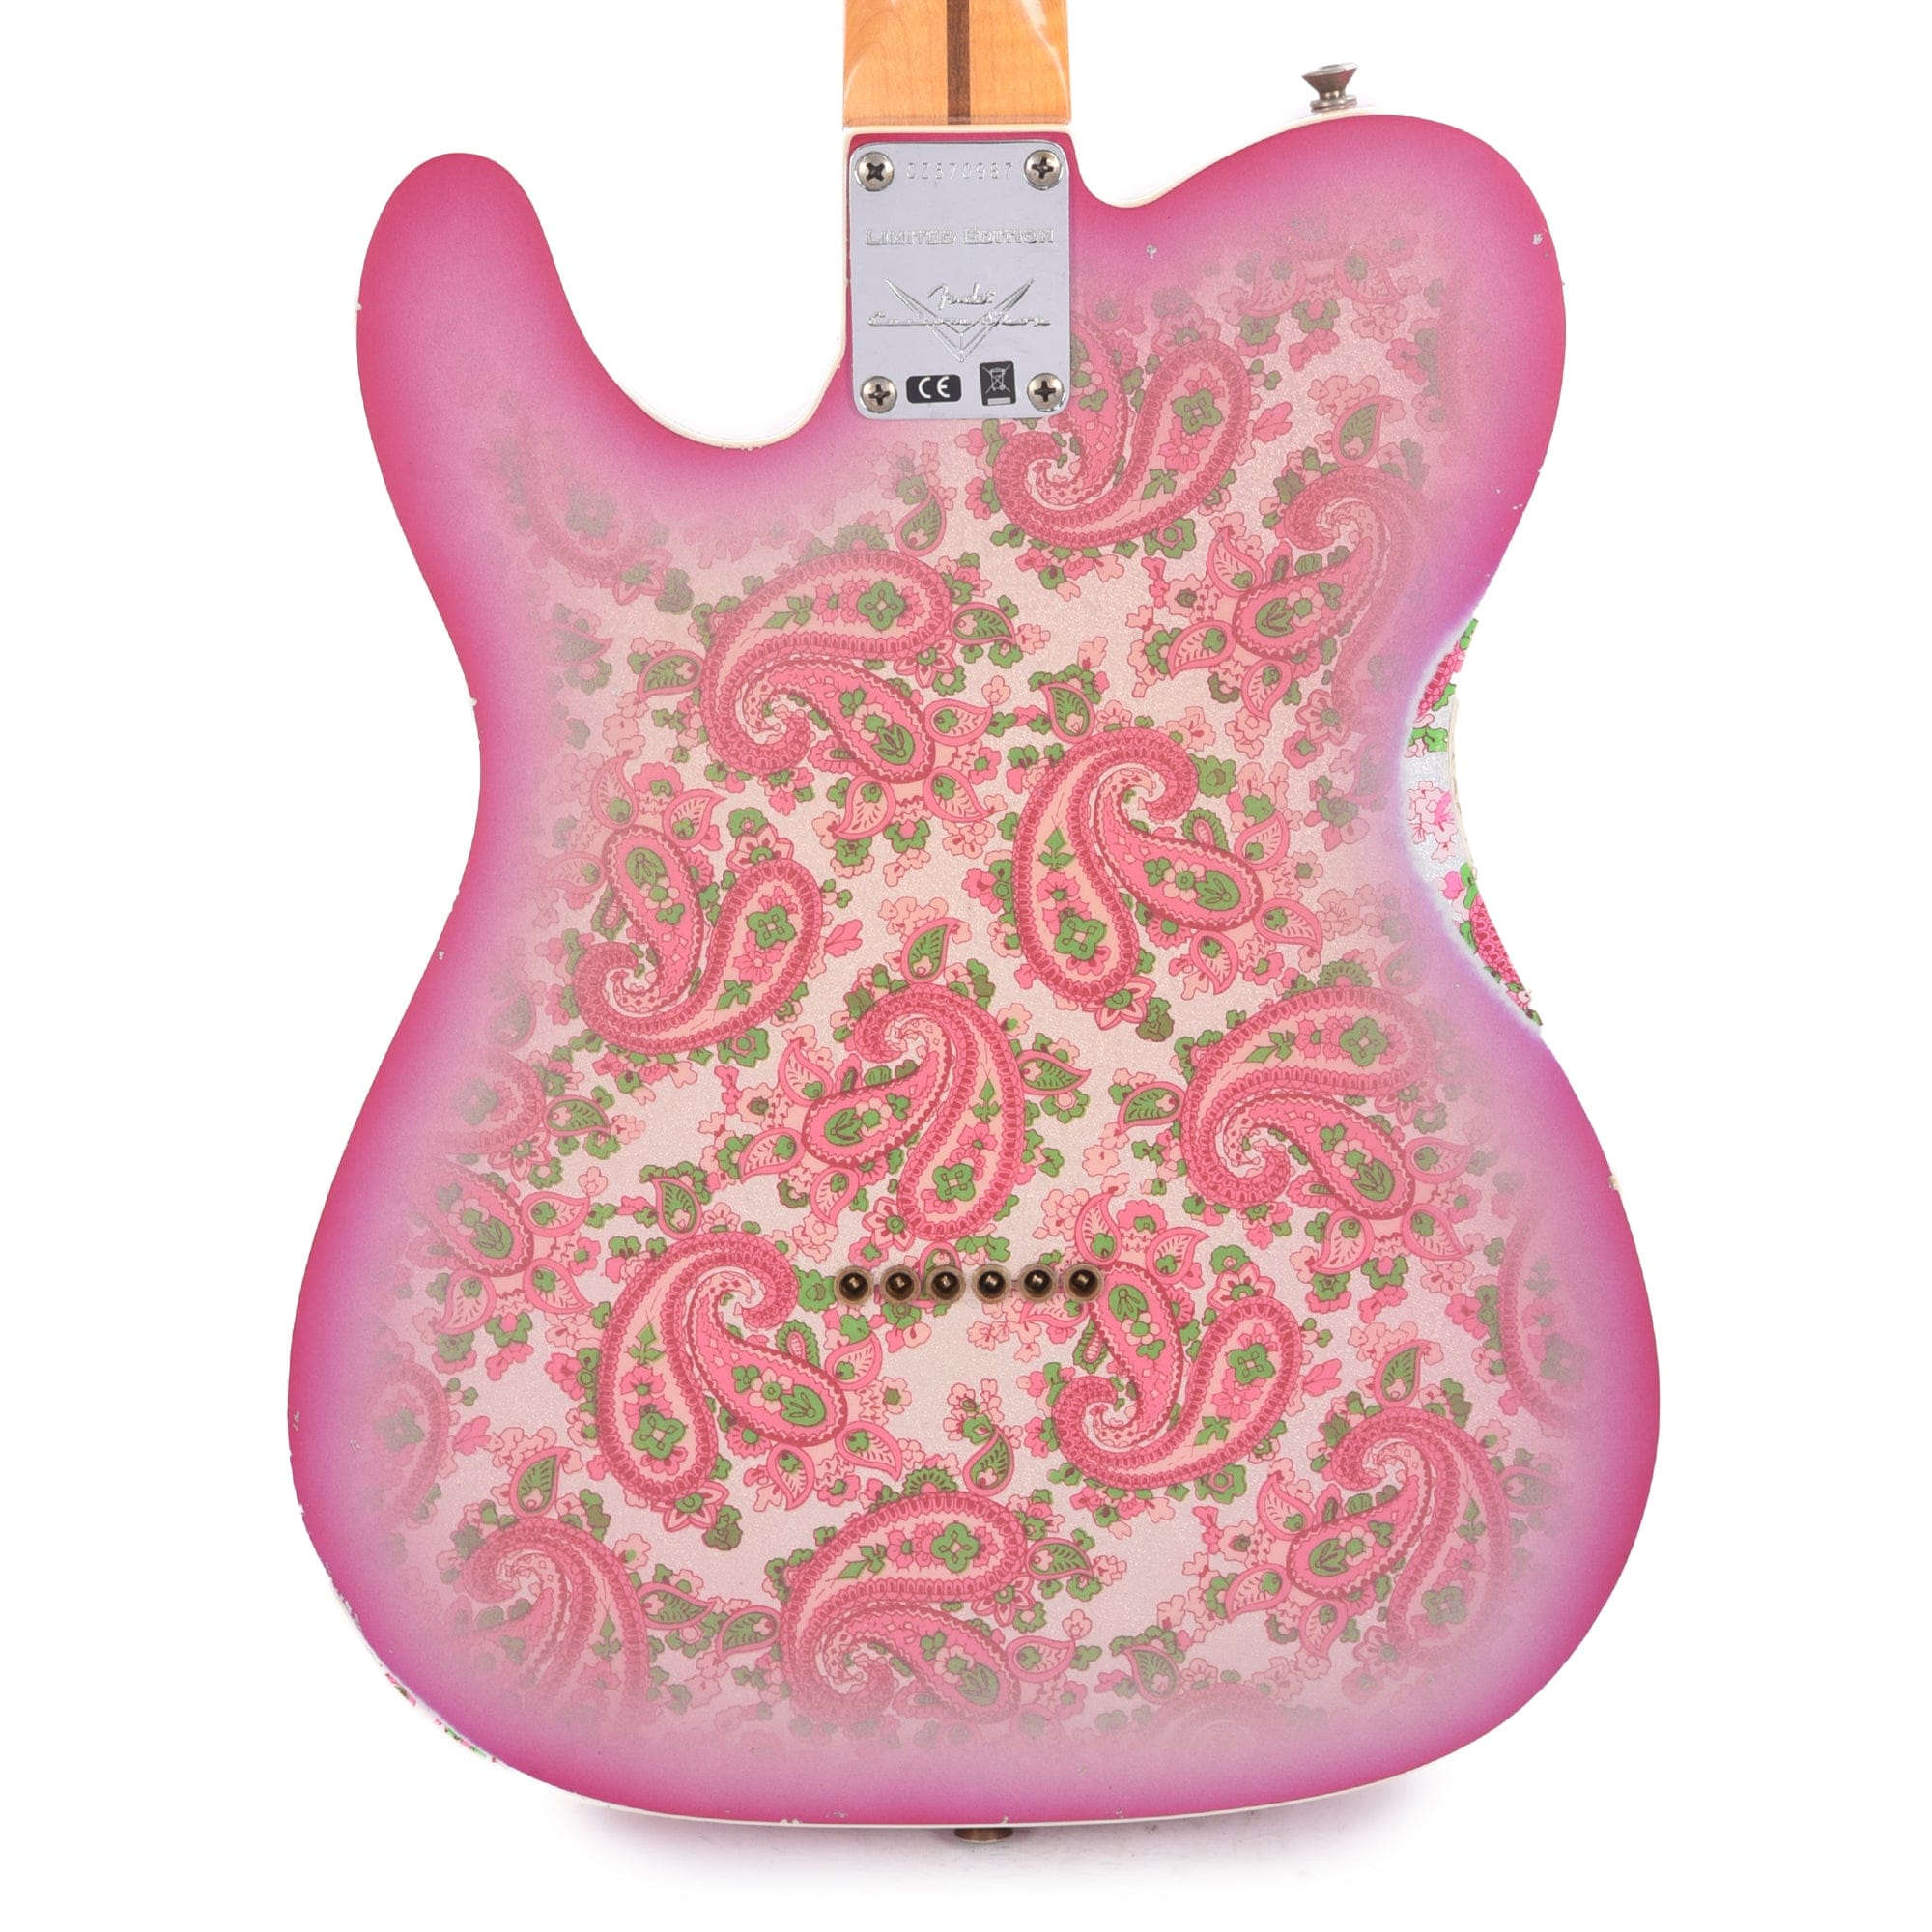 Fender Custom Shop Limited Edition Dual P90 Telecaster Relic Pink Paisley Electric Guitars / Solid Body